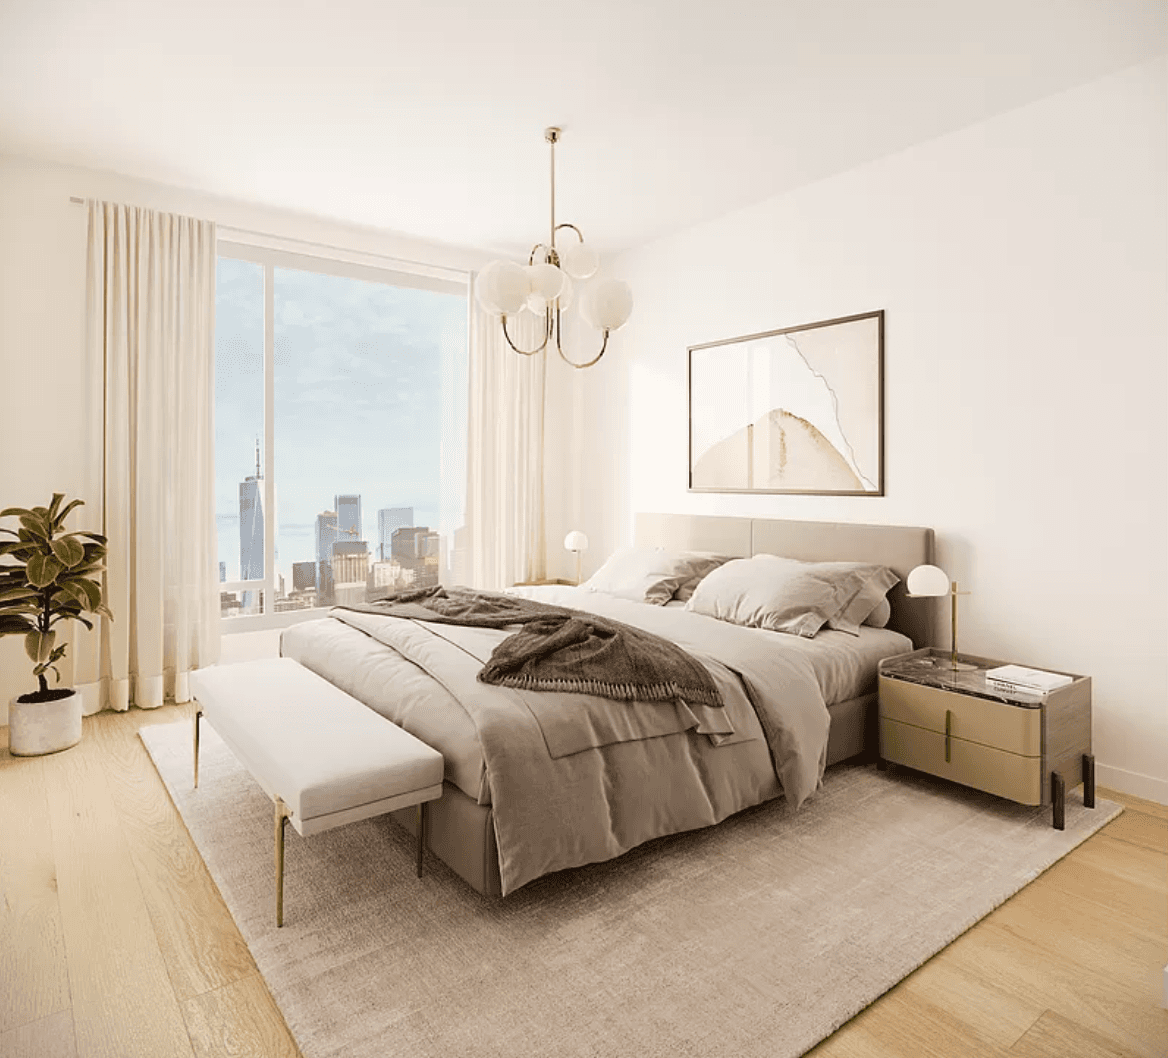 New Development Lucent33 in Long Island City